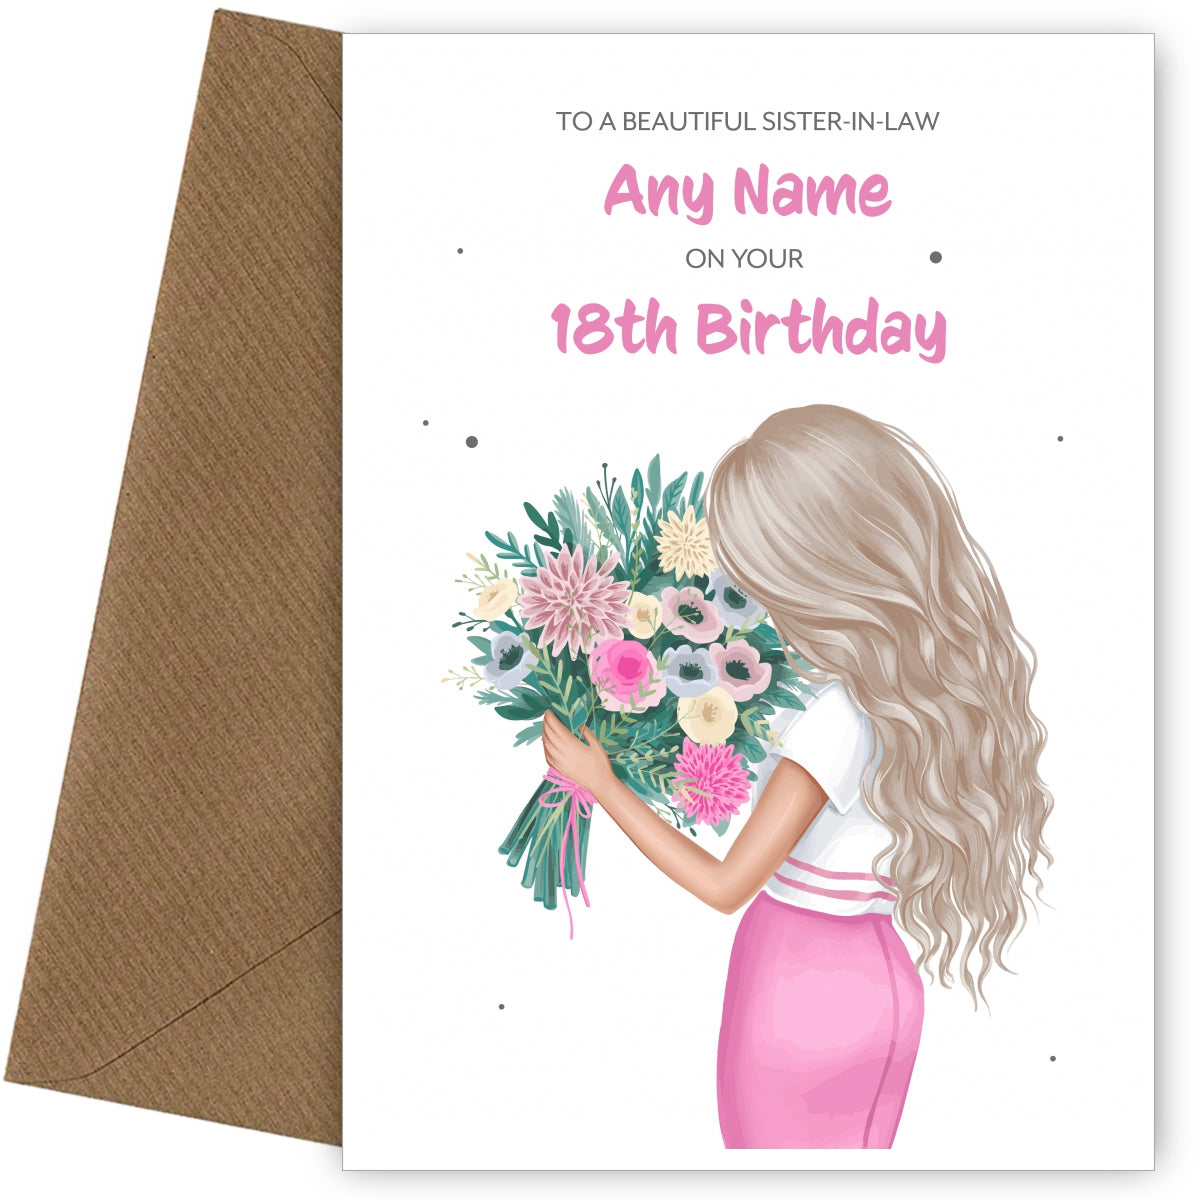 18th Birthday Card for Sister-in-law - Beautiful Blonde